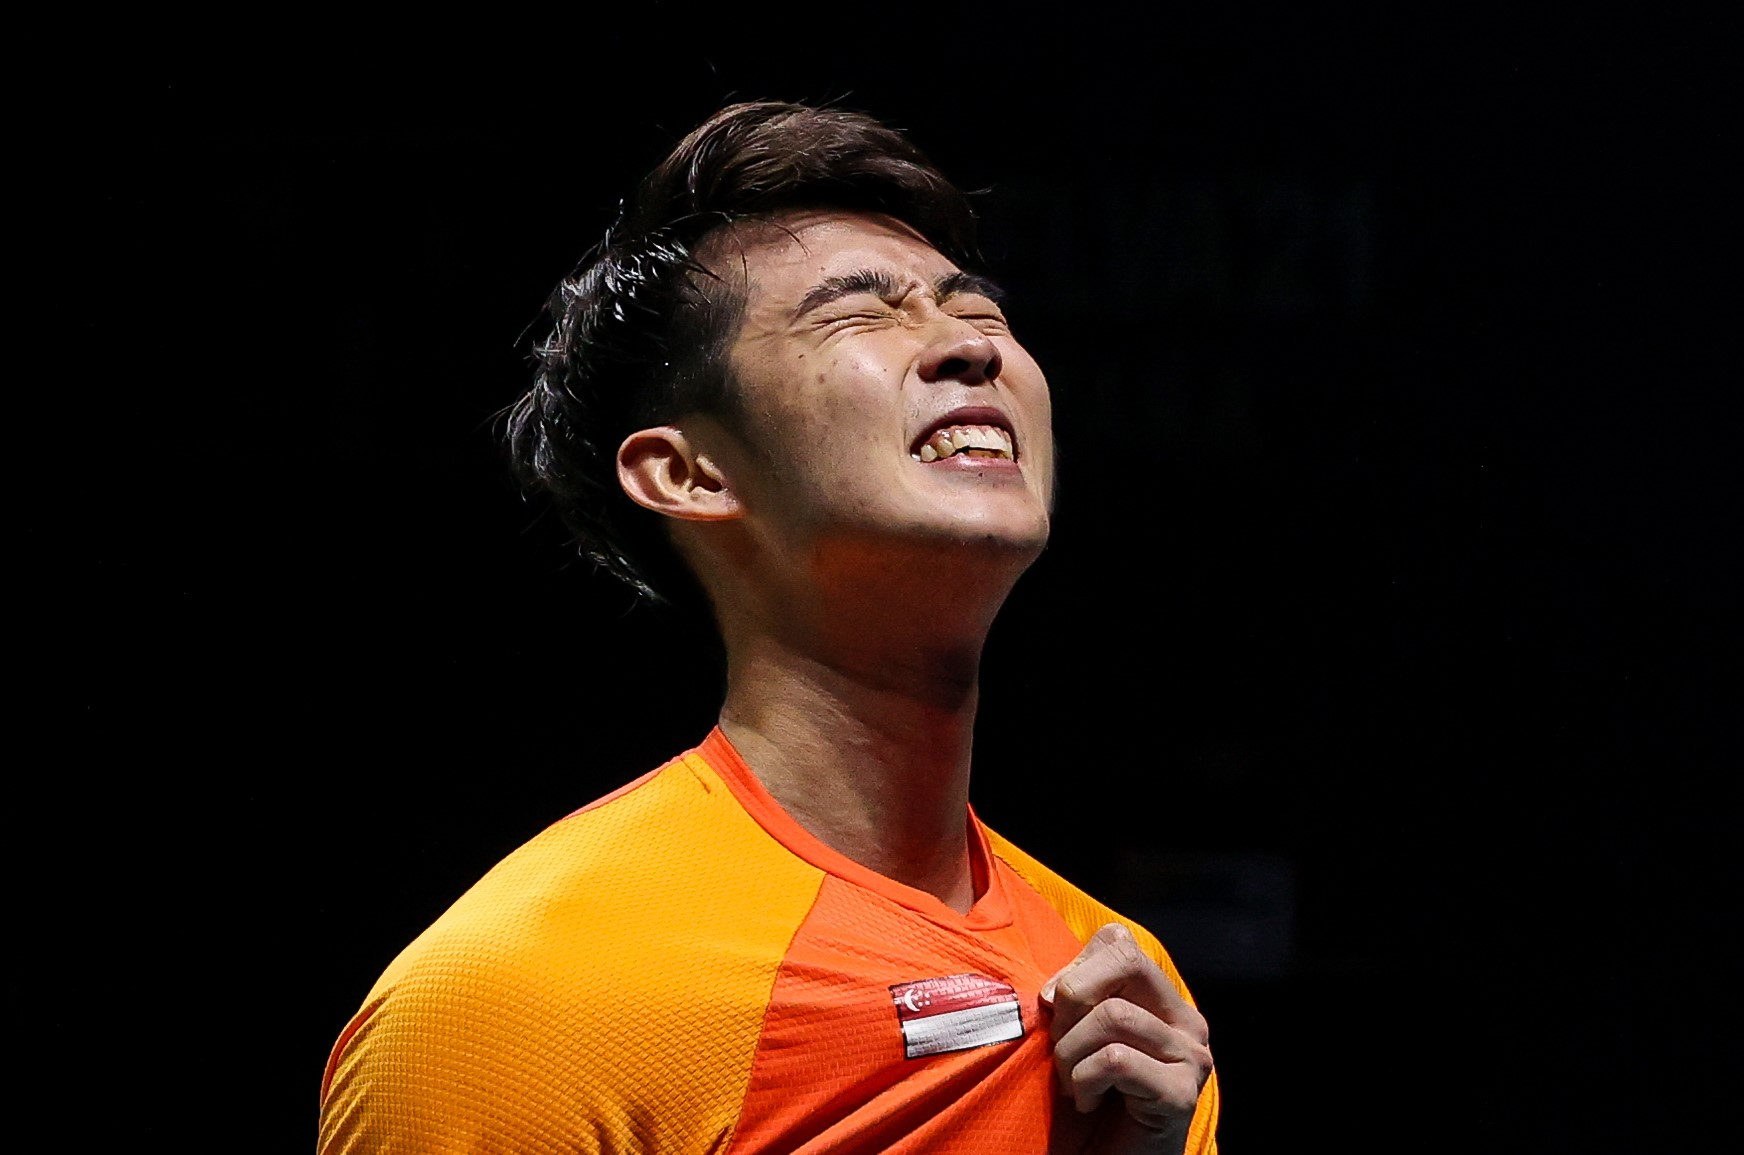 Loh Kean Yew during his winning campaign at the World Championships 2021